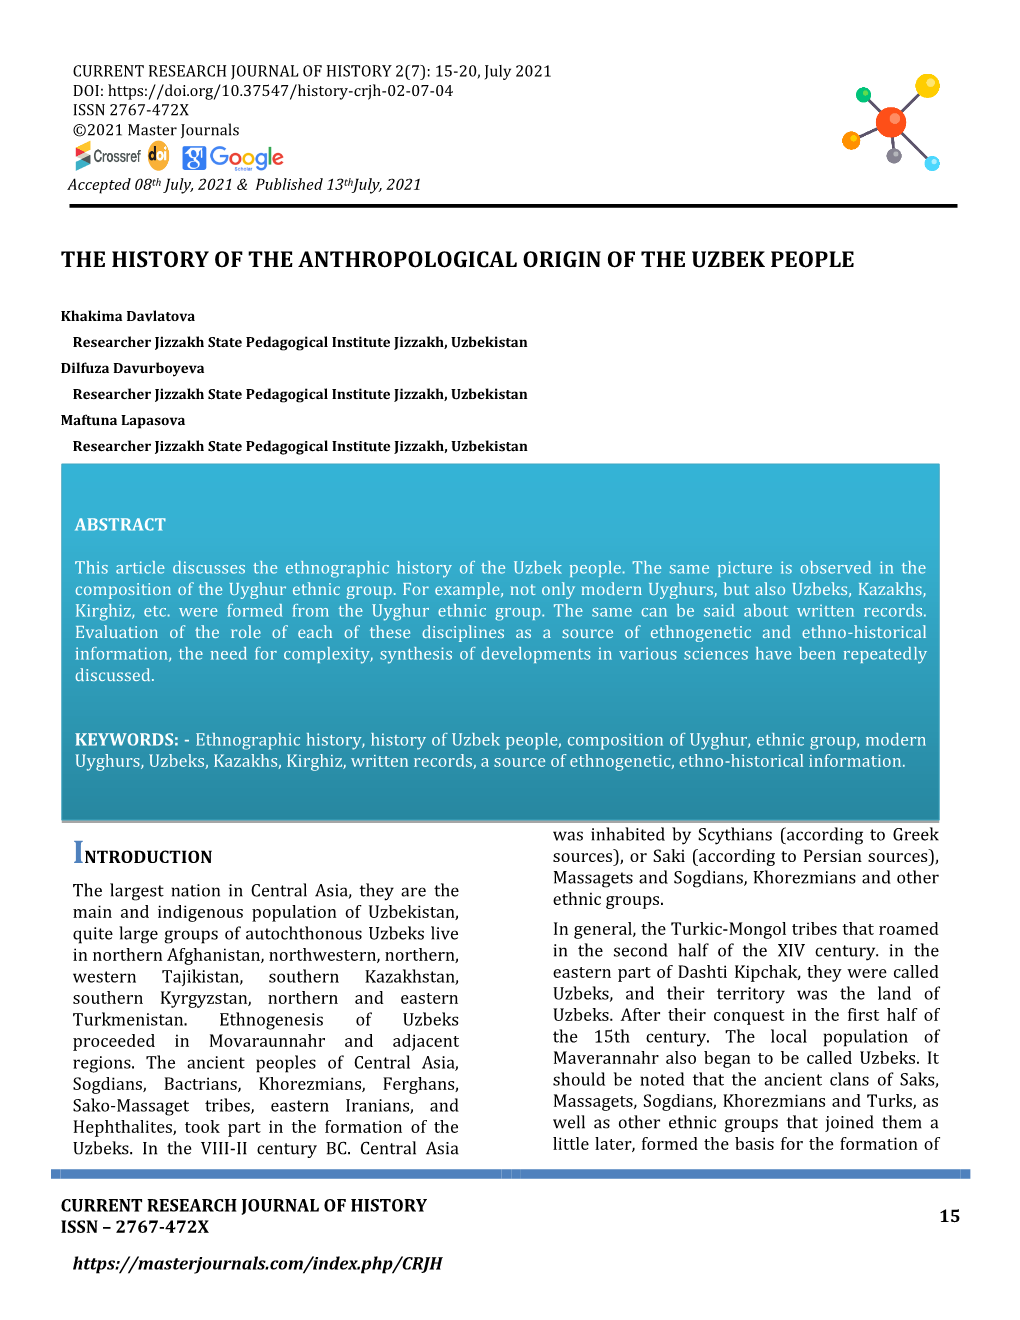 The History of the Anthropological Origin of the Uzbek People